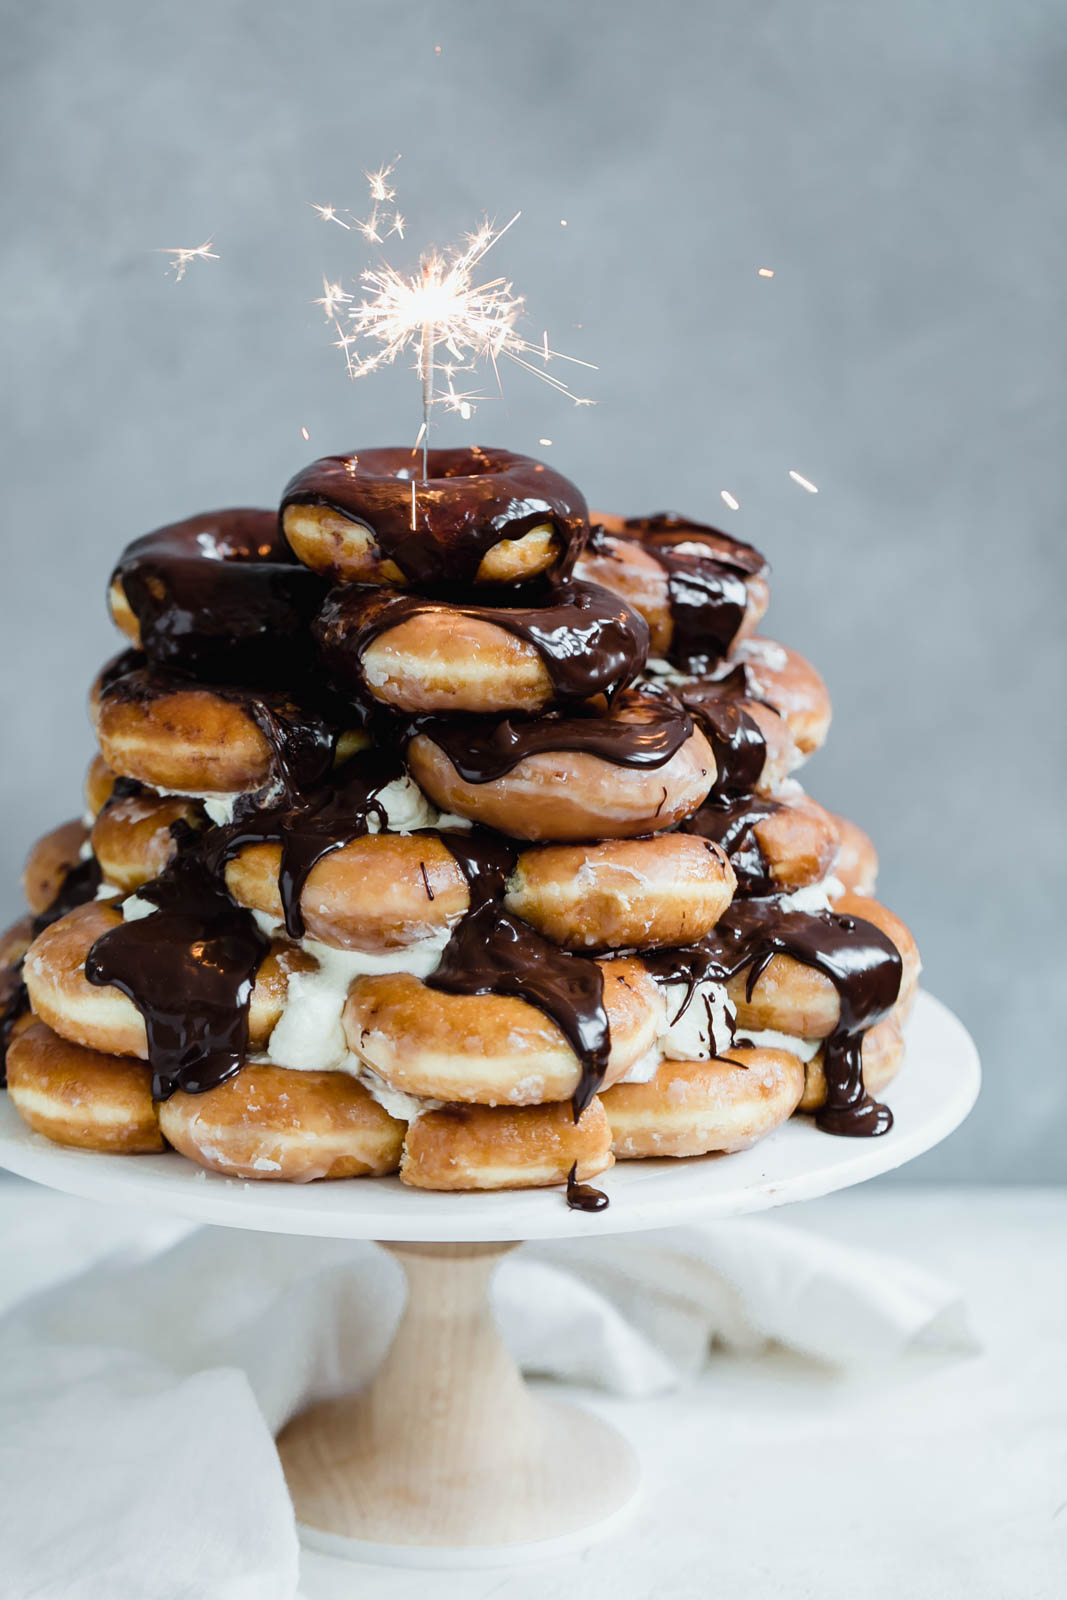 Krispy Kreme Doughnut Cake: a cake made entirely of Krispy Kreme doughnuts and drizzled with chocolate fudge sauce. I’ve died and gone to heaven.